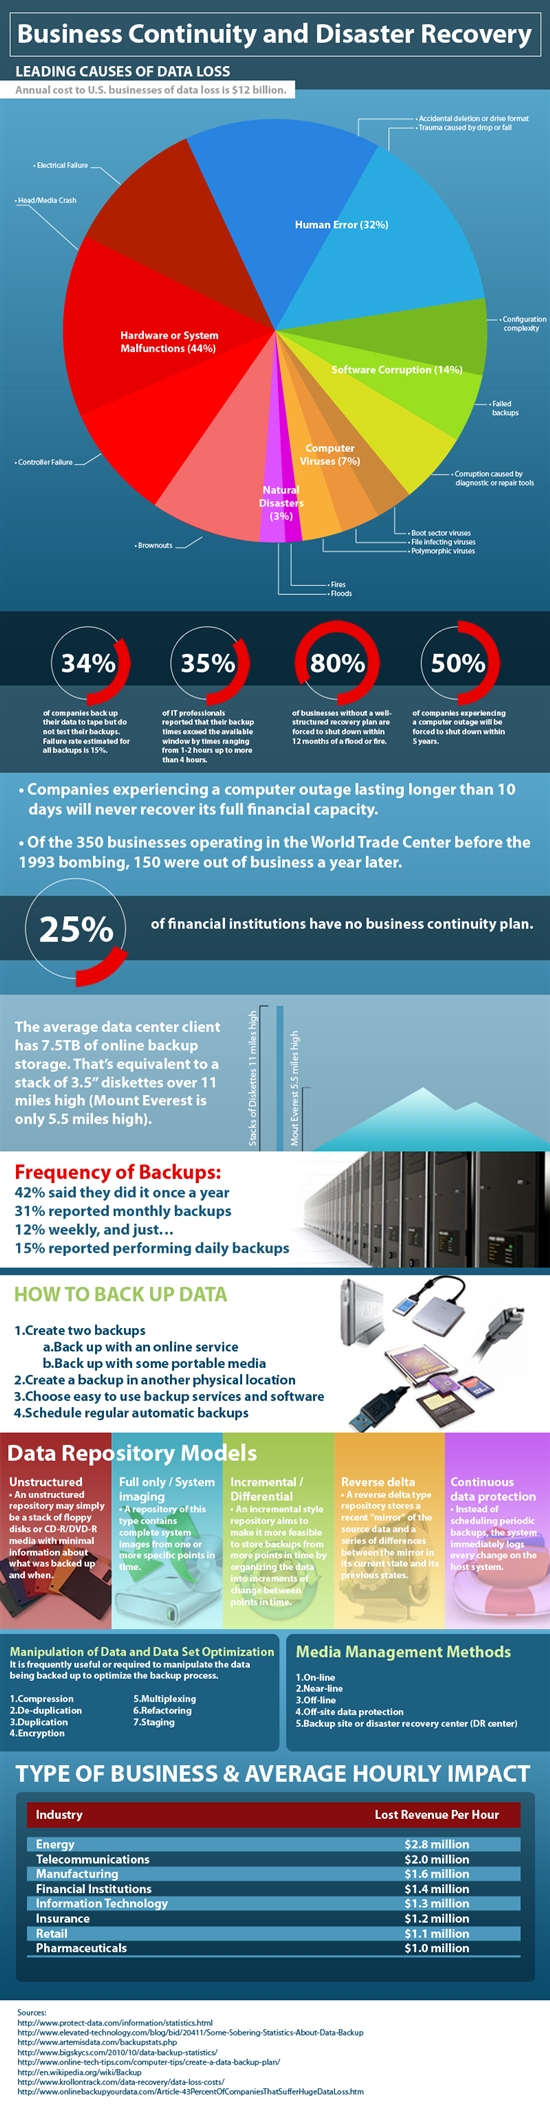 Business continuity and disaster recovery infographic